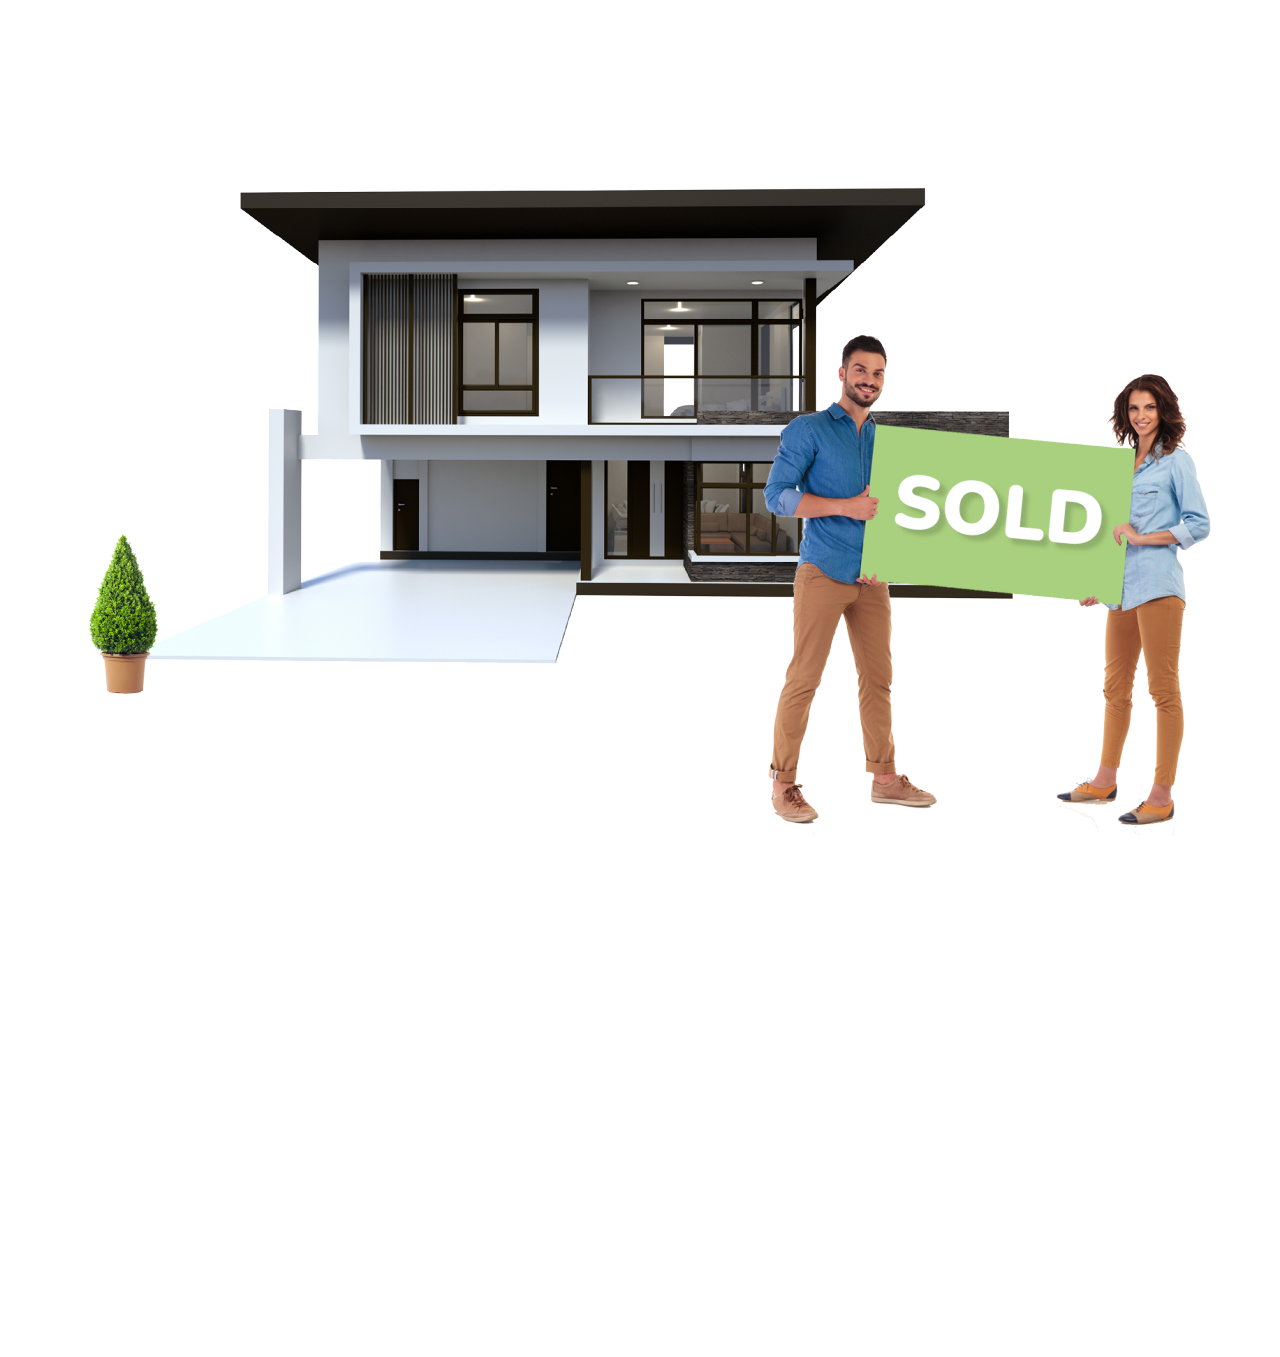 Happy couple in front of new home holding sold sign